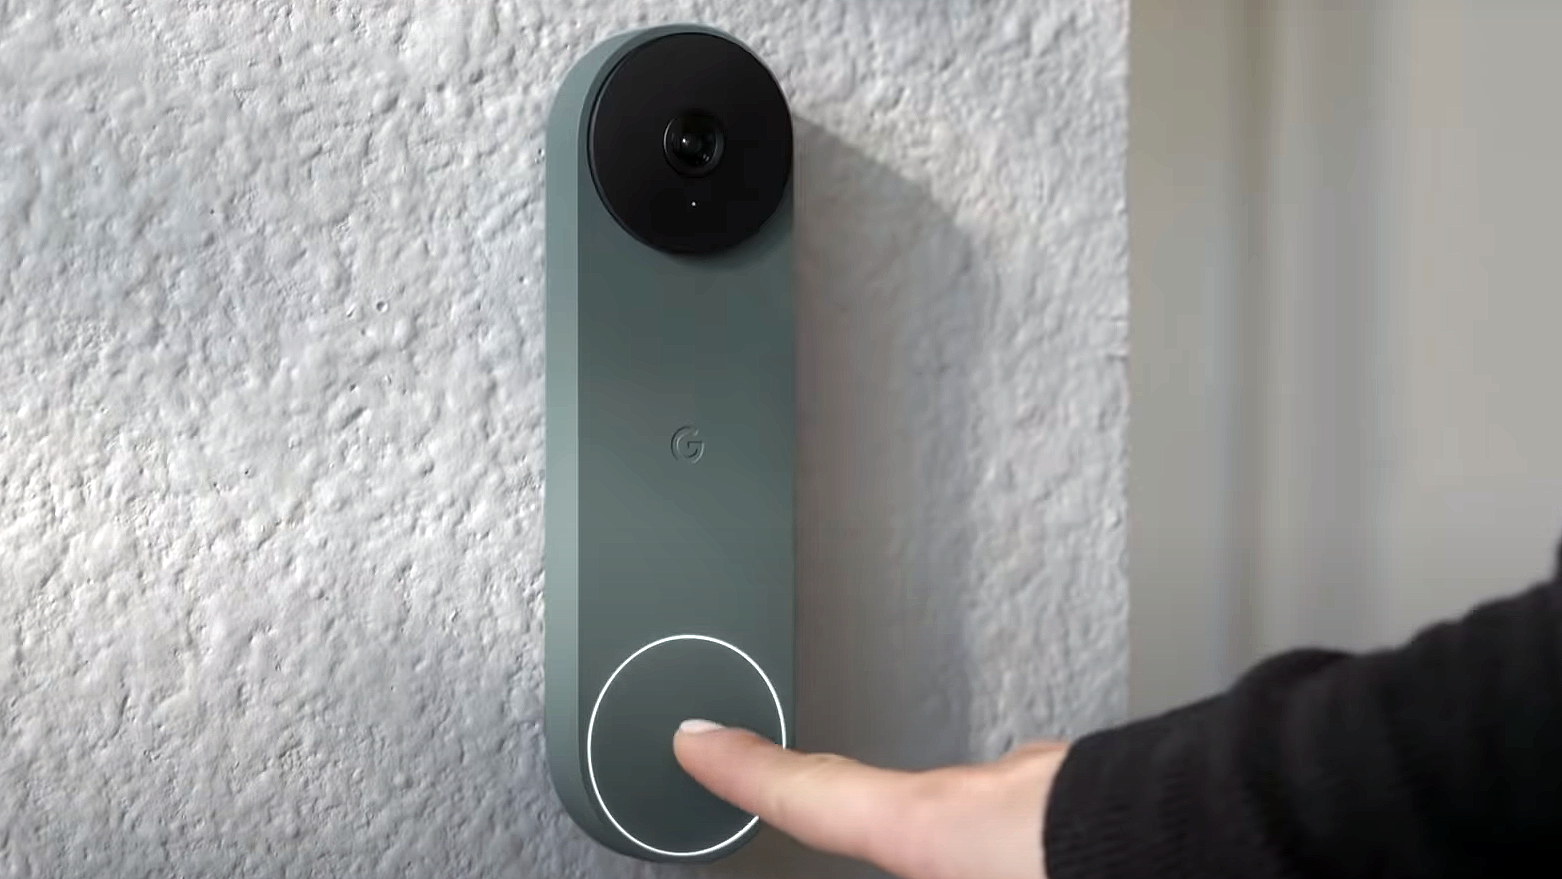 A green Nest Doorbell against a white wall, being pressed